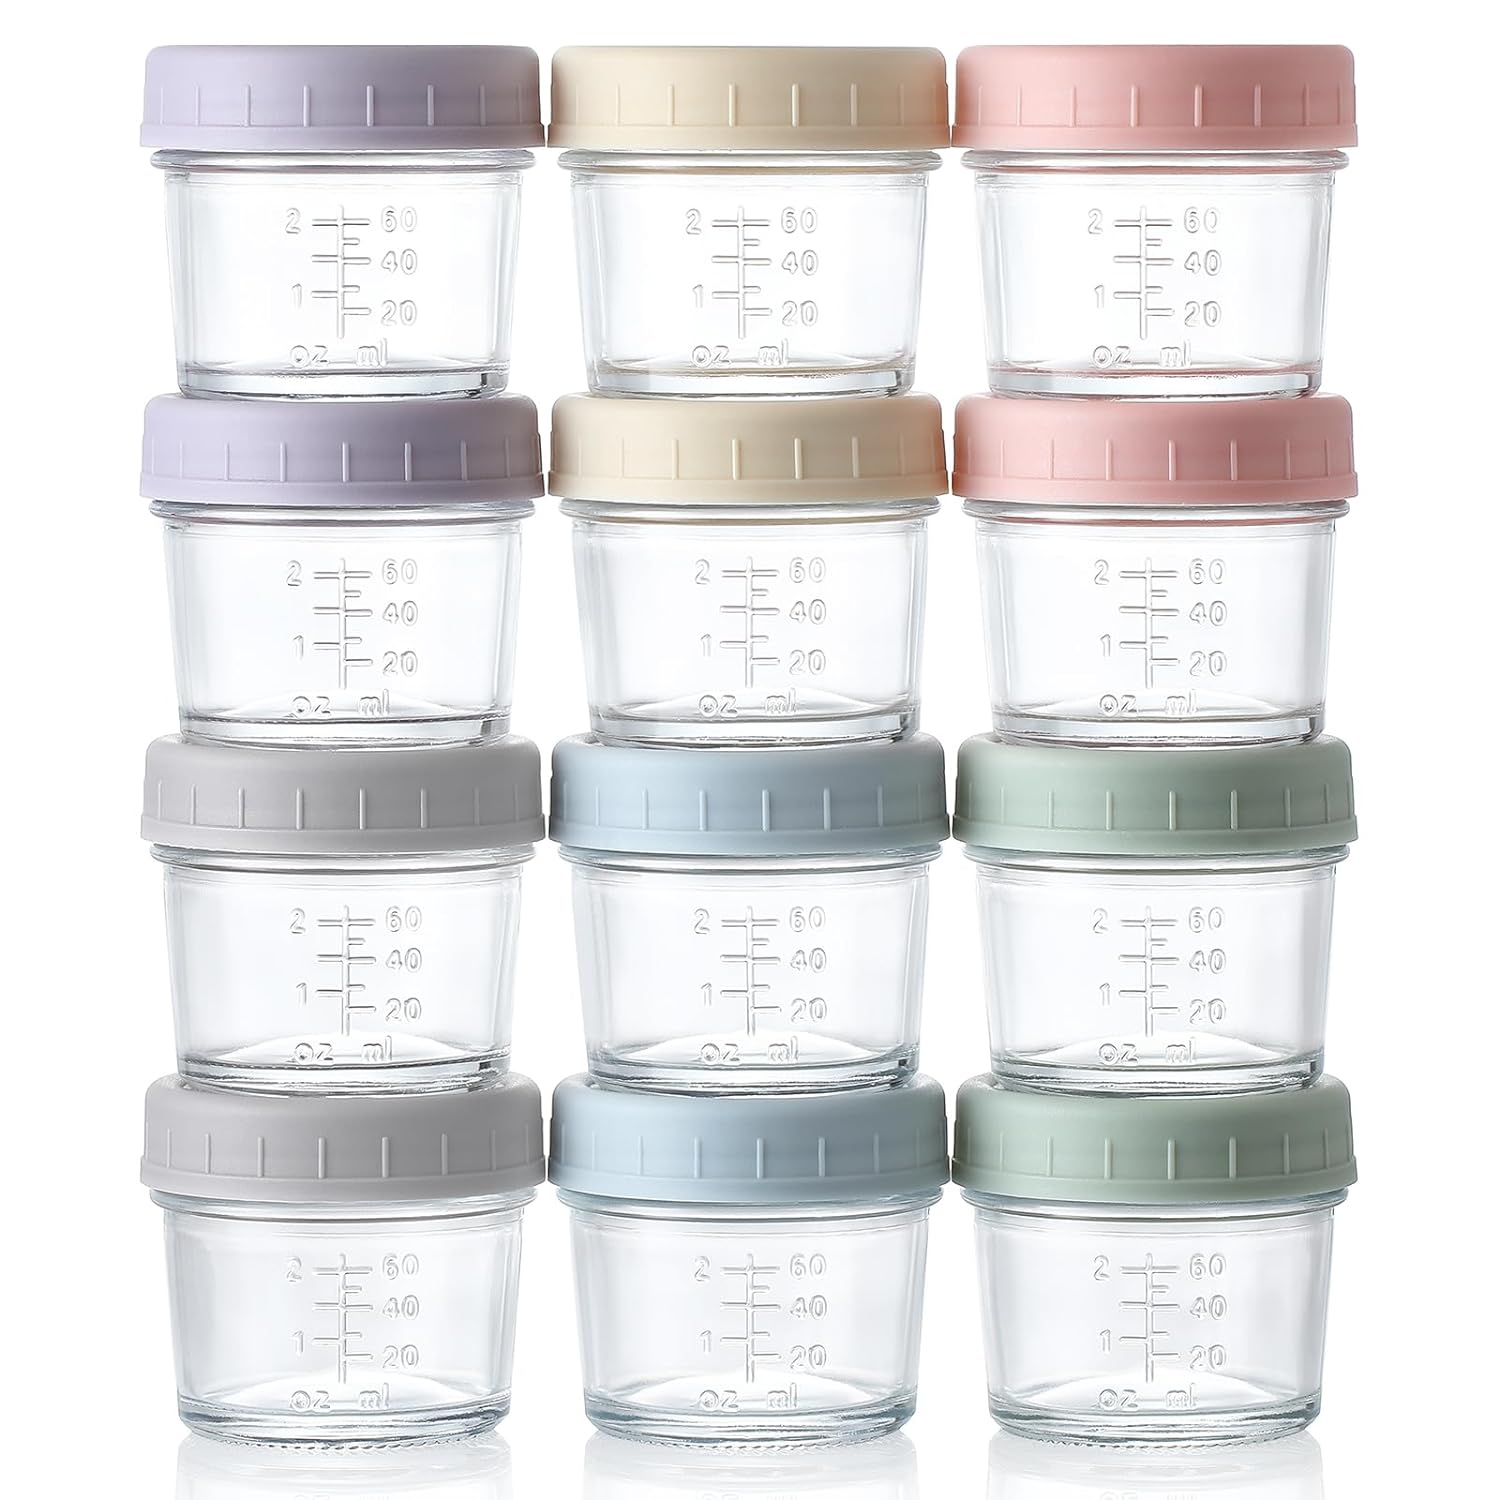 Save Big on VITEVER 12Pack Glass Baby Food Storage Containers - 4 oz - Now Only $17.84!